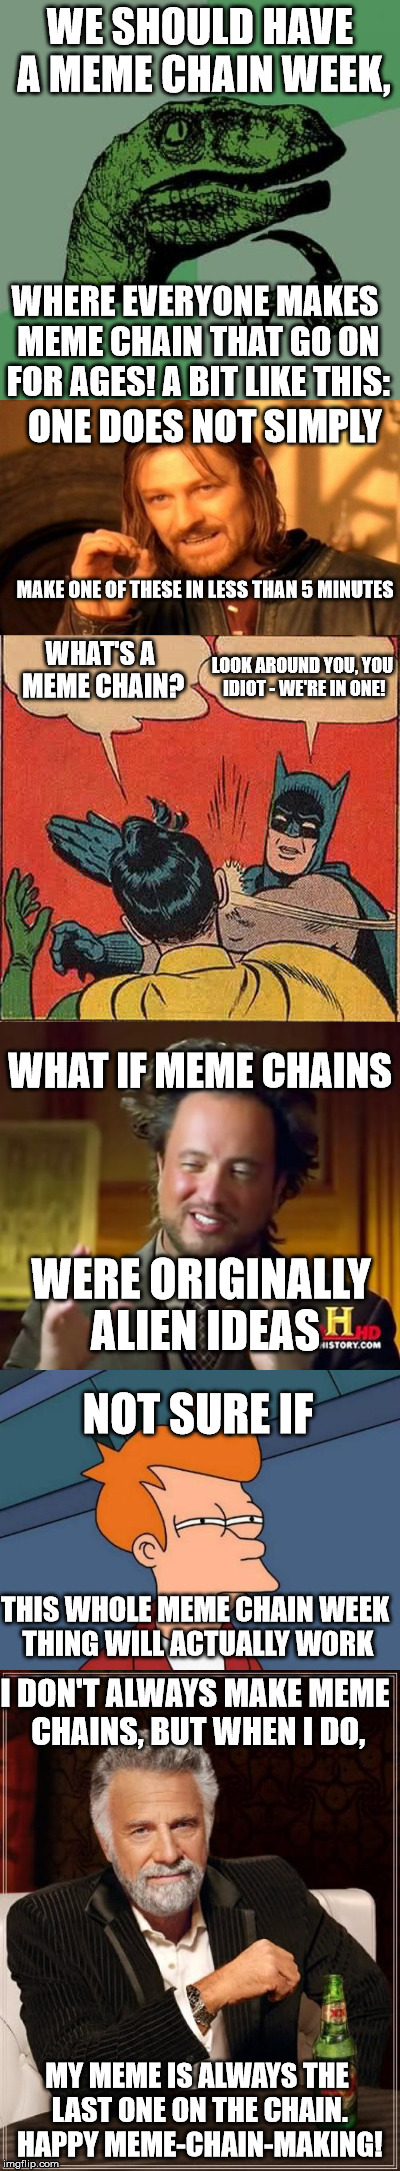 meme chains - meme chain week? | WE SHOULD HAVE A MEME CHAIN WEEK, WHERE EVERYONE MAKES MEME CHAIN THAT GO ON FOR AGES! A BIT LIKE THIS:; ONE DOES NOT SIMPLY; MAKE ONE OF THESE IN LESS THAN 5 MINUTES; LOOK AROUND YOU, YOU IDIOT - WE'RE IN ONE! WHAT'S A MEME CHAIN? WHAT IF MEME CHAINS; WERE ORIGINALLY ALIEN IDEAS; NOT SURE IF; THIS WHOLE MEME CHAIN WEEK THING WILL ACTUALLY WORK; I DON'T ALWAYS MAKE MEME CHAINS, BUT WHEN I DO, MY MEME IS ALWAYS THE LAST ONE ON THE CHAIN. HAPPY MEME-CHAIN-MAKING! | image tagged in memes,meme chain | made w/ Imgflip meme maker